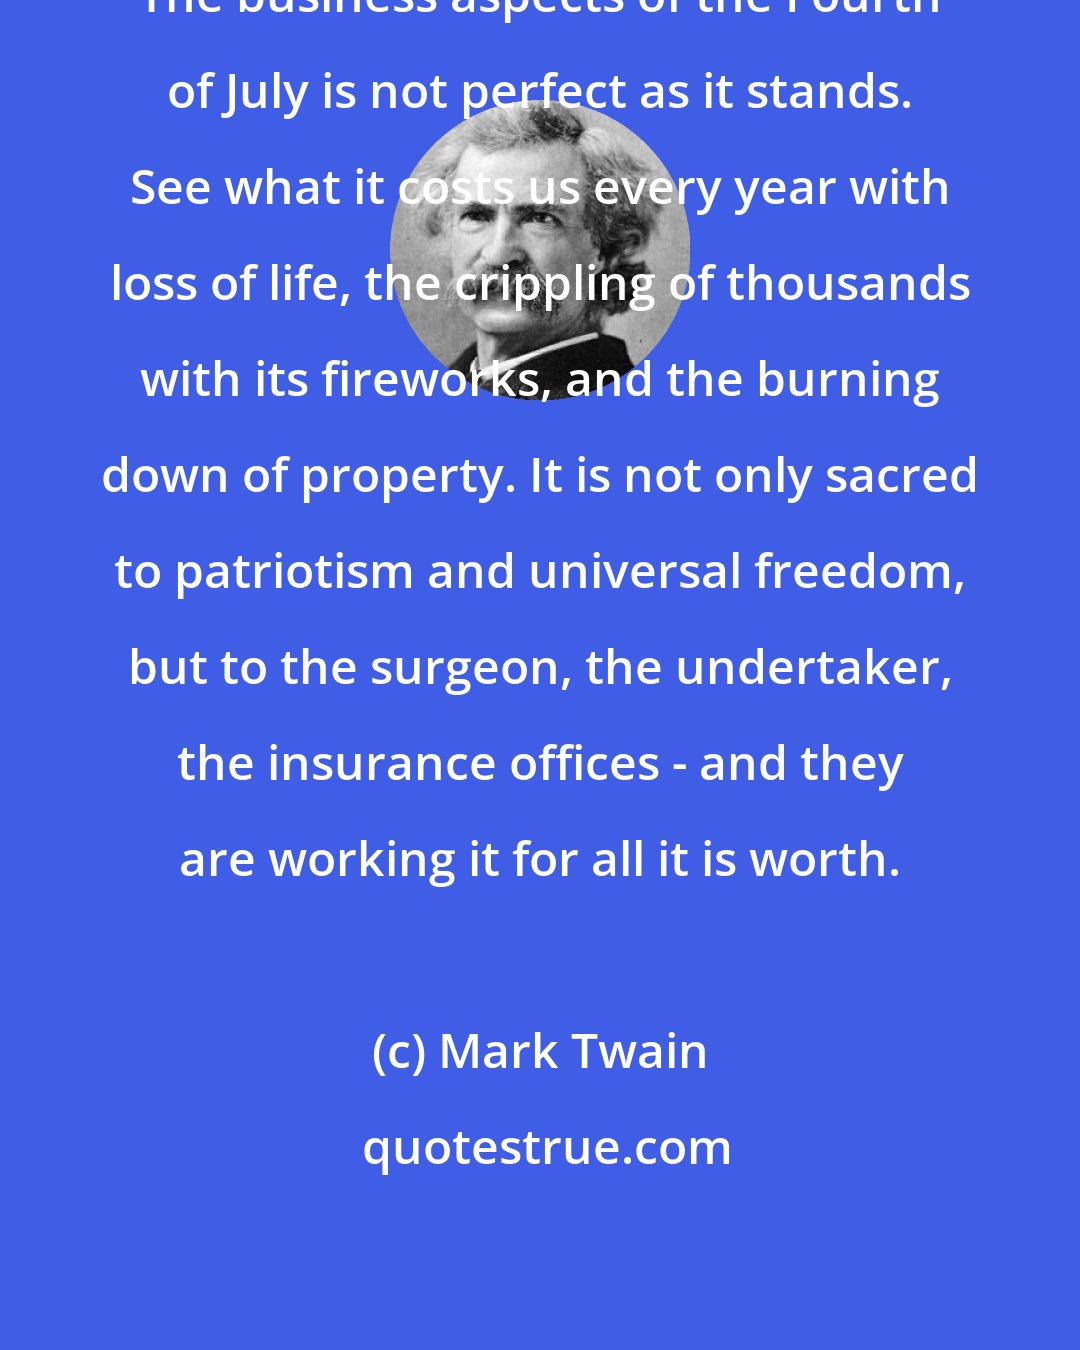 Mark Twain: The business aspects of the Fourth of July is not perfect as it stands. See what it costs us every year with loss of life, the crippling of thousands with its fireworks, and the burning down of property. It is not only sacred to patriotism and universal freedom, but to the surgeon, the undertaker, the insurance offices - and they are working it for all it is worth.